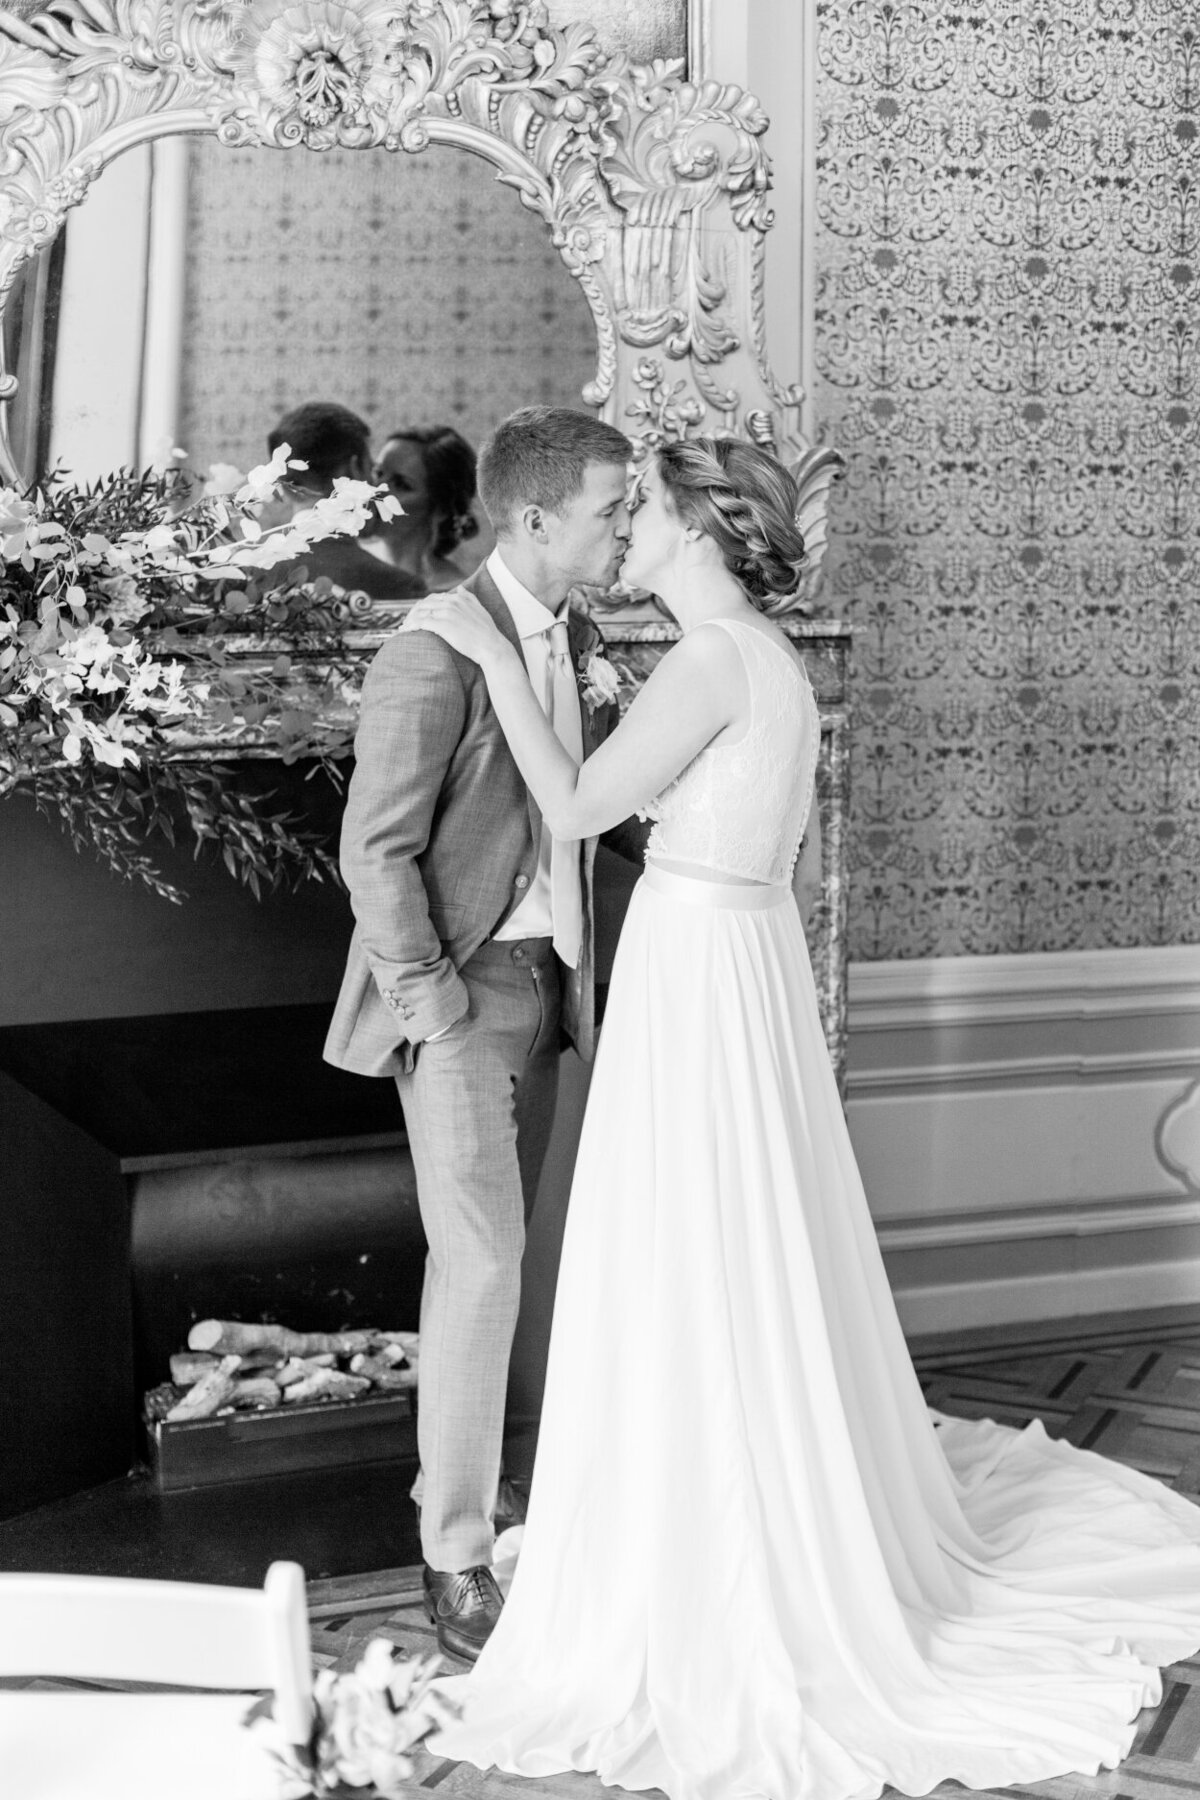 Black and white photo of the first kiss after the wedding ceremony for an intimate wedding photoshoot at the Tassenmuseum organized by Lovely & Planned